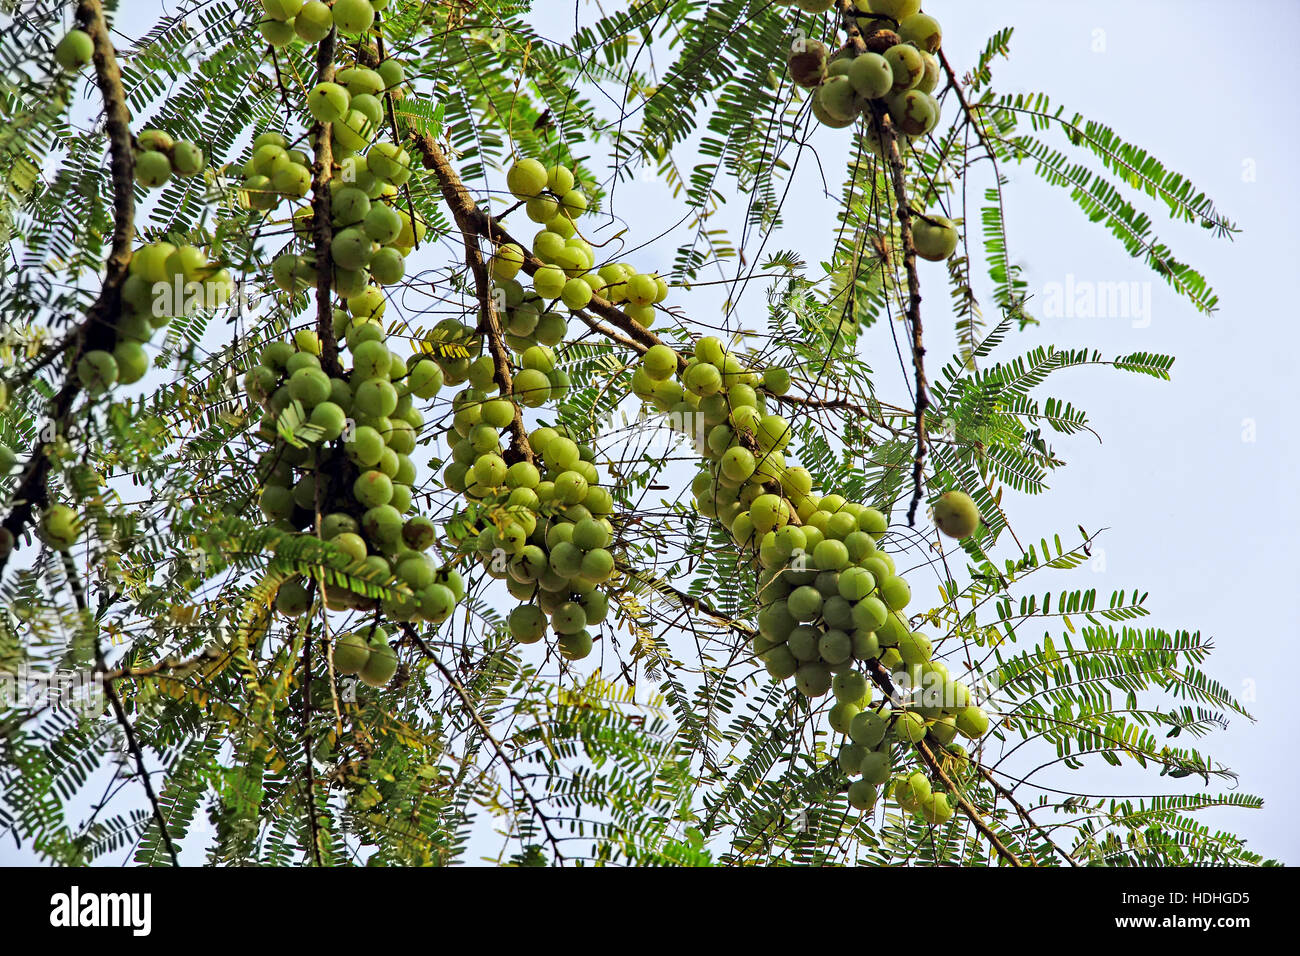 Cluster of Indian gooseberry (Phyllanthus emblica) in tree. An essential part of traditional Indian Ayurvedic medicines. Stock Photo